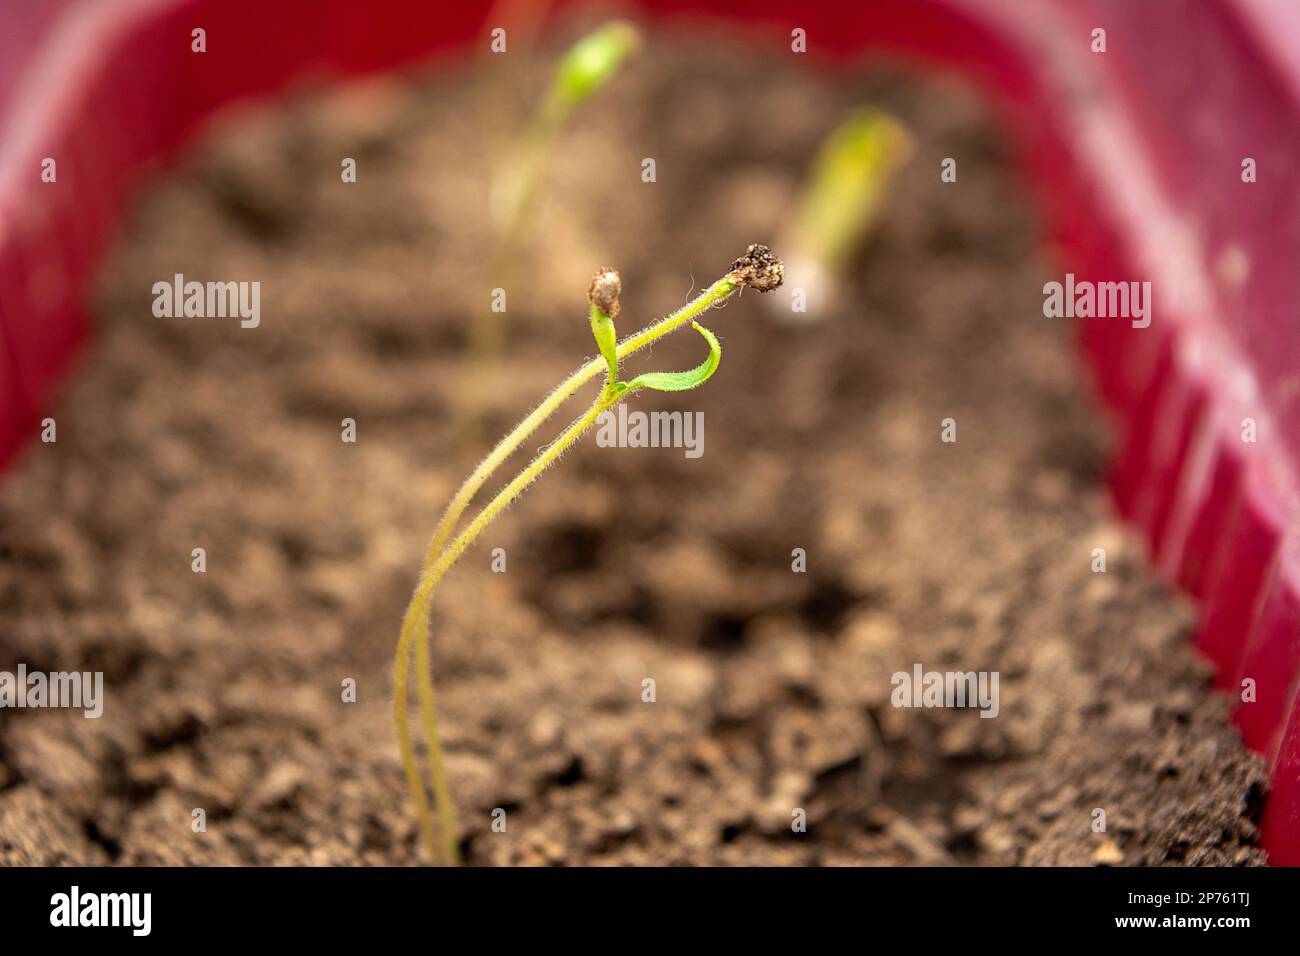 Cherry tomato seedlings begining to sprout in a pot with earth Stock Photo